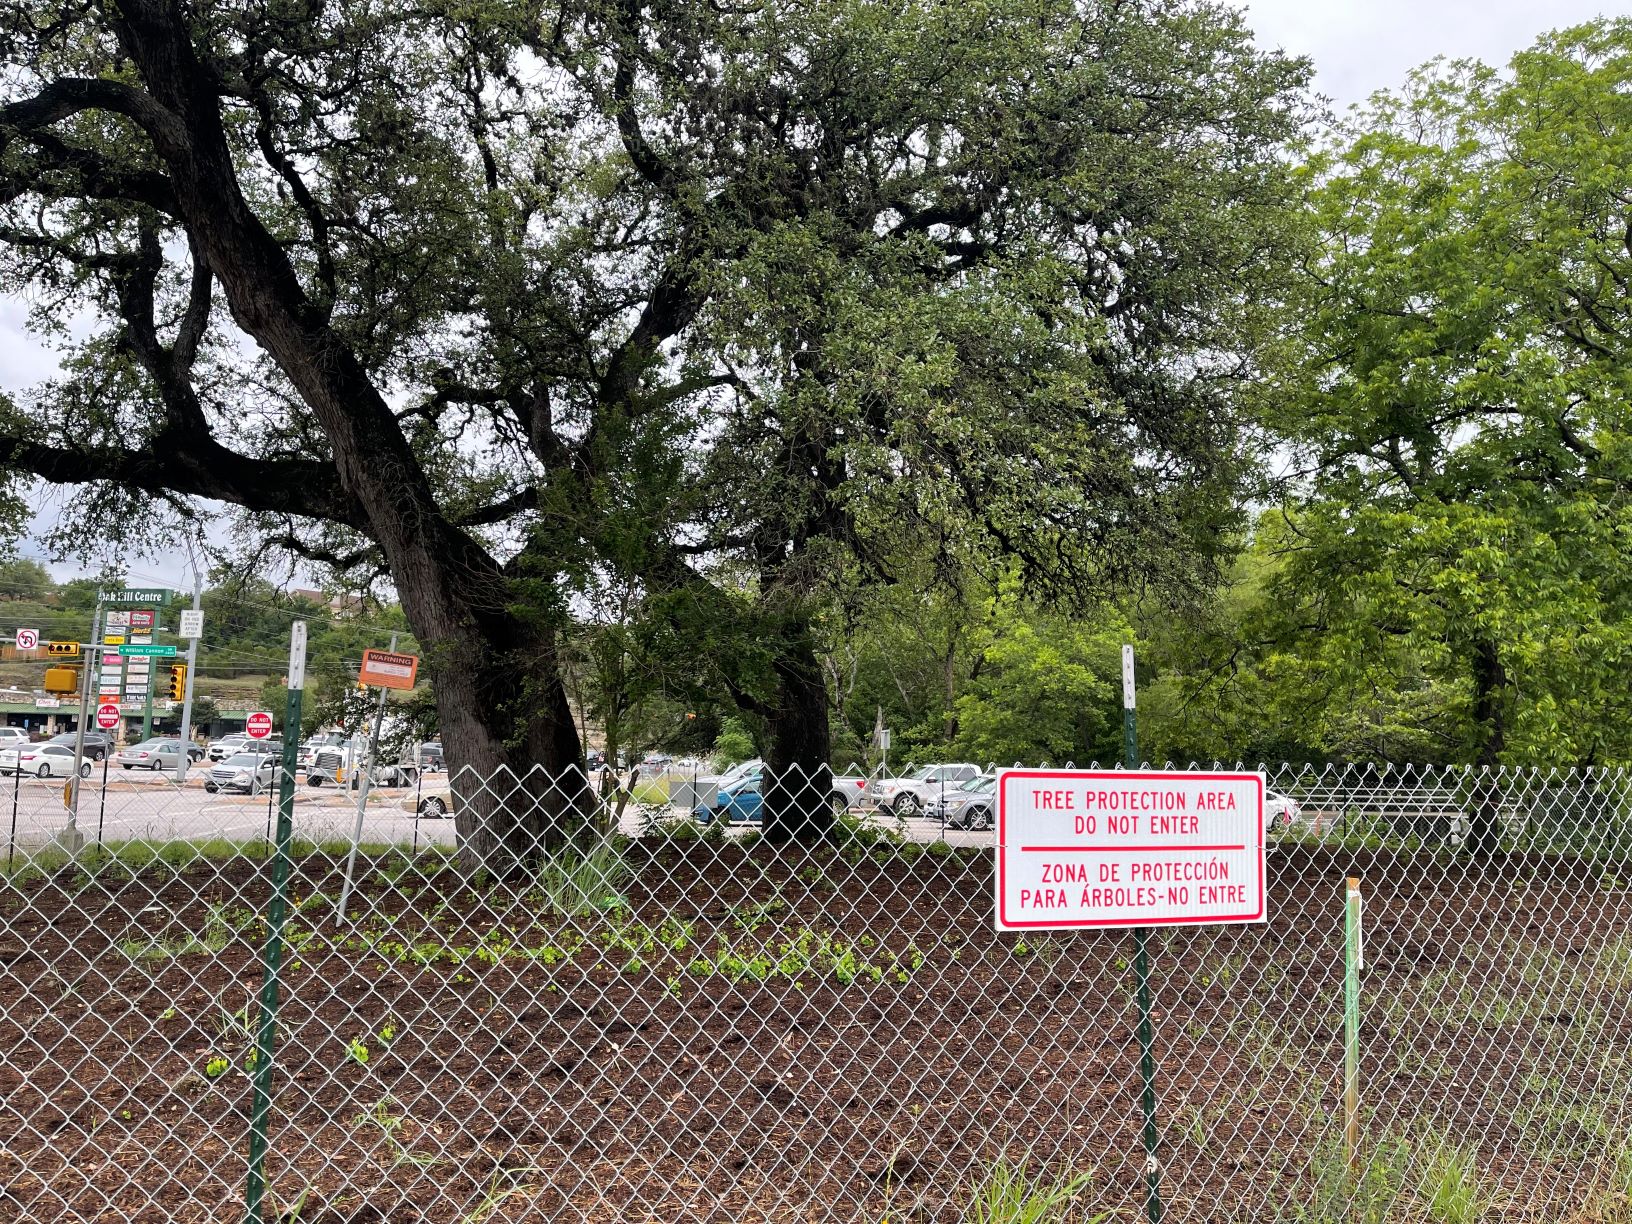 Iconic trees “The Nieces” remain fenced off in a dedicated “Tree Protection Area” near William Cannon Boulevard, May 2021